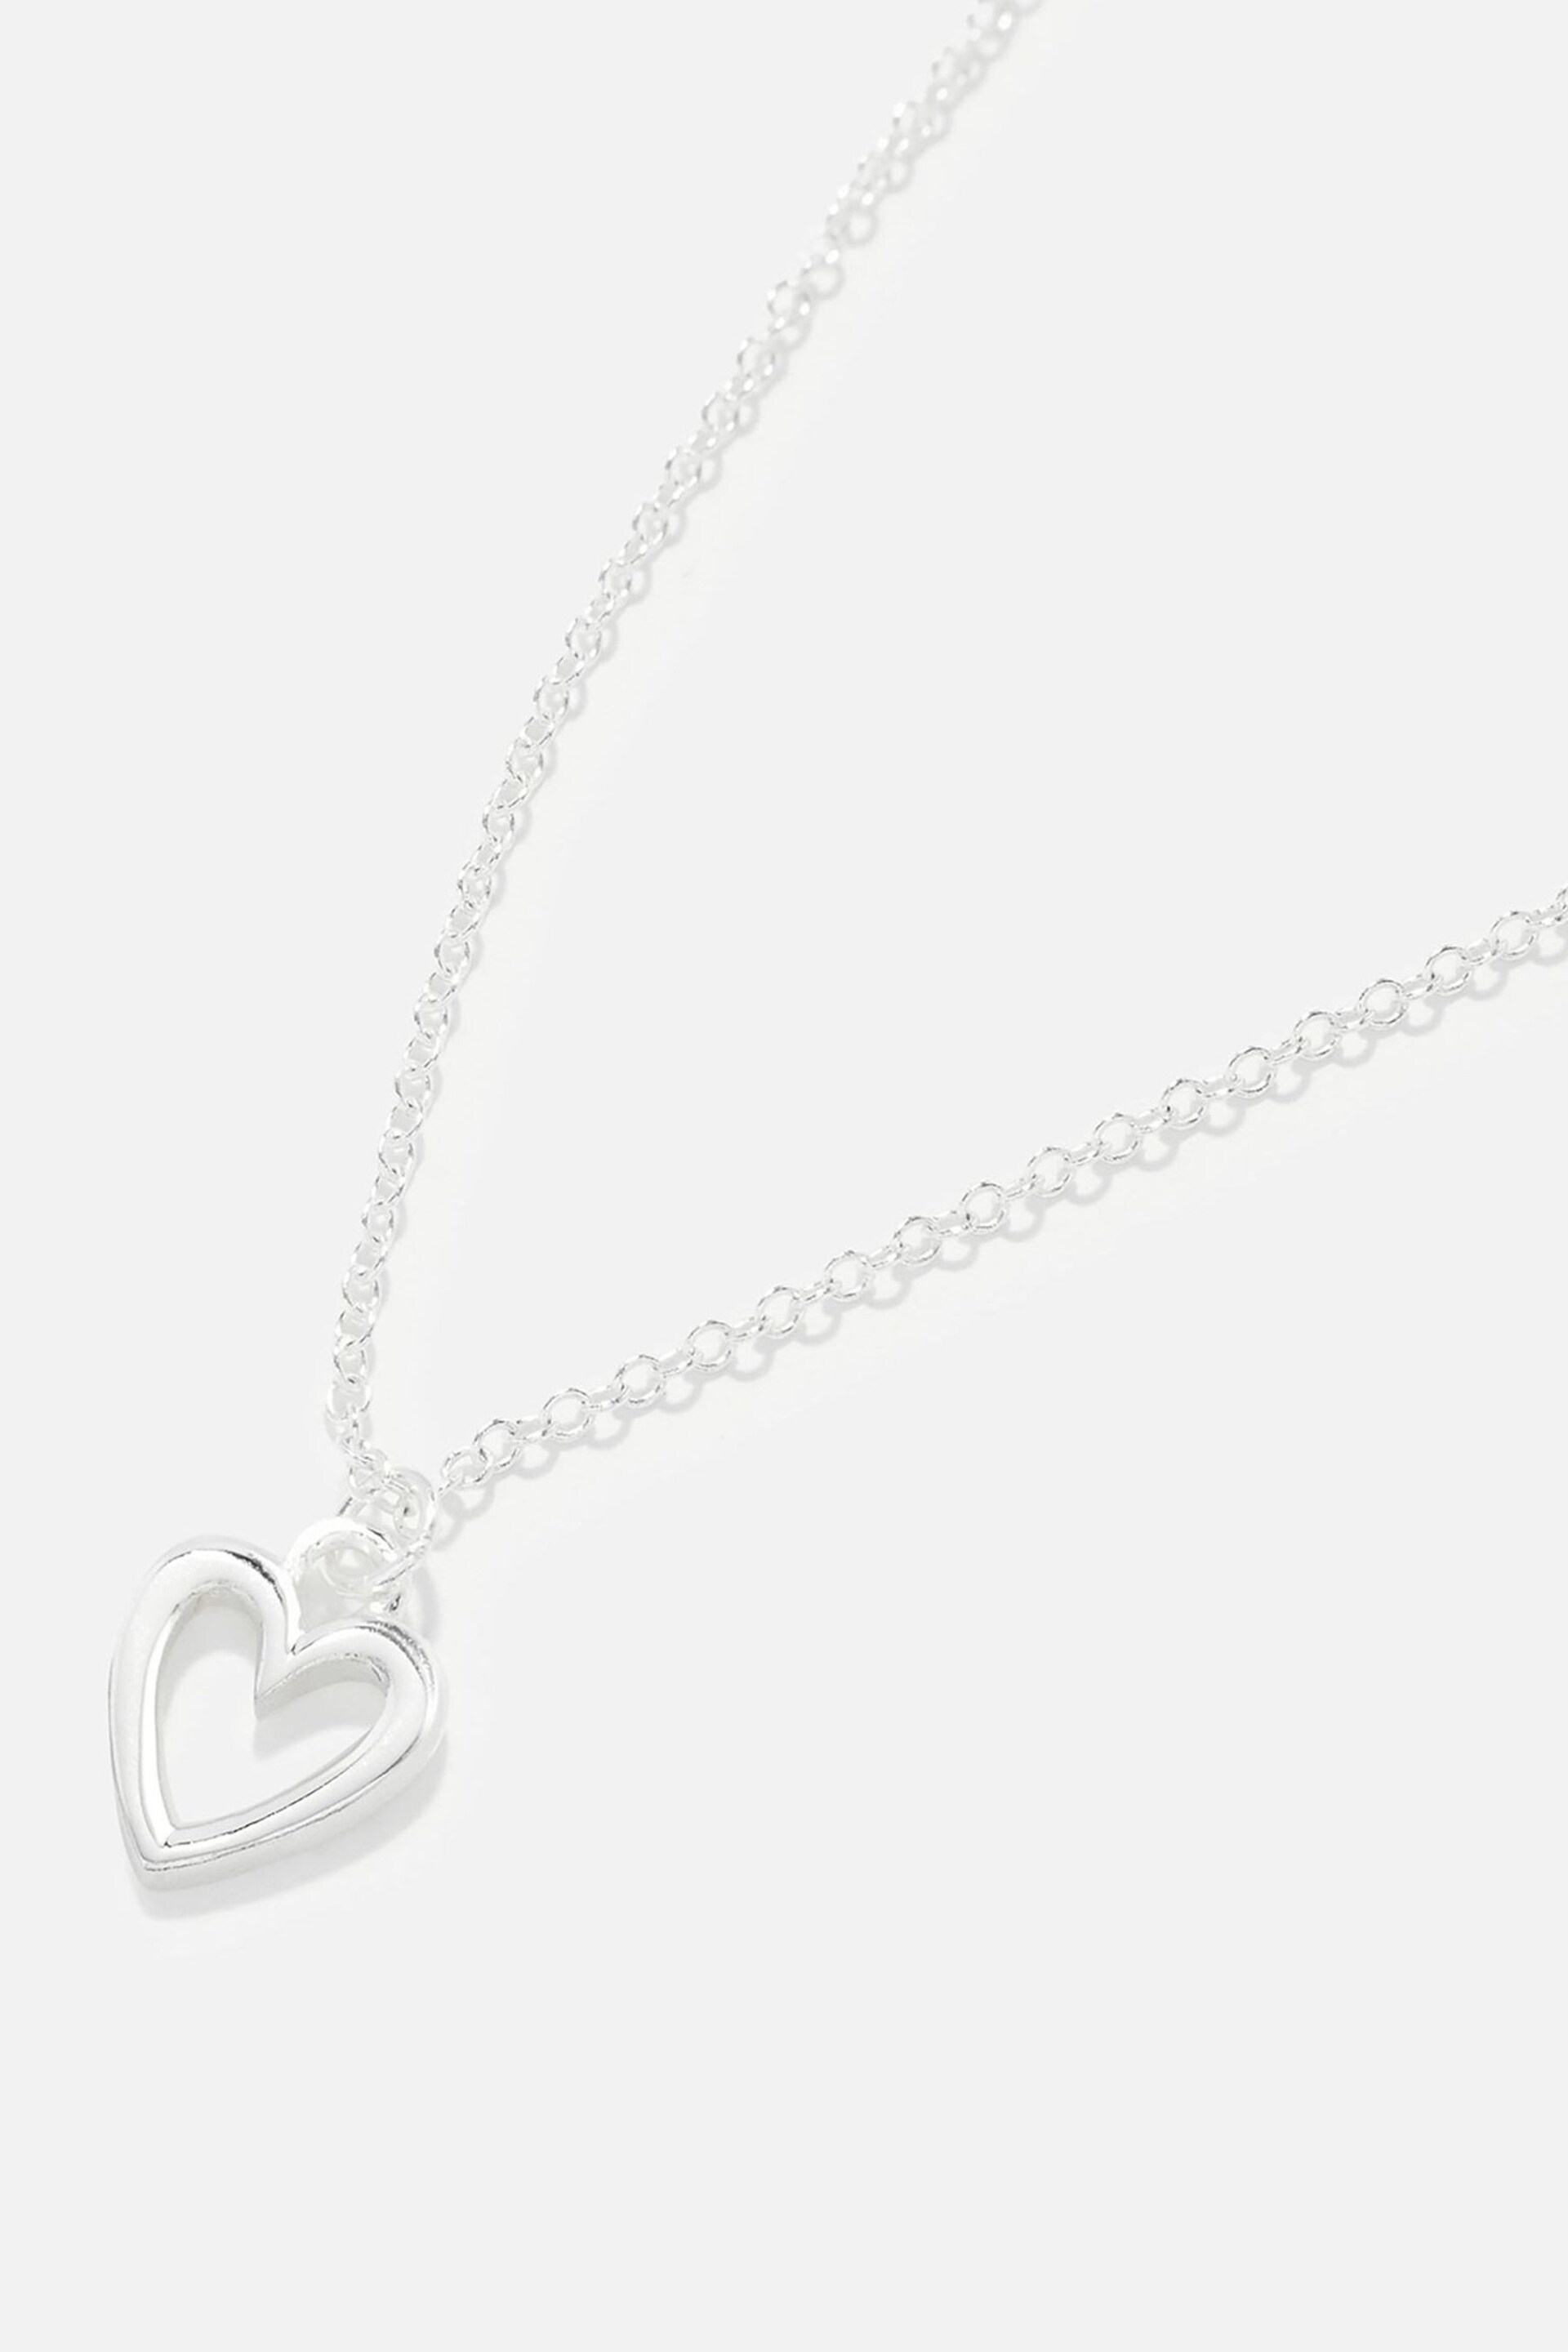 Accessorize Sterling Silver Heart Necklace - Image 2 of 2